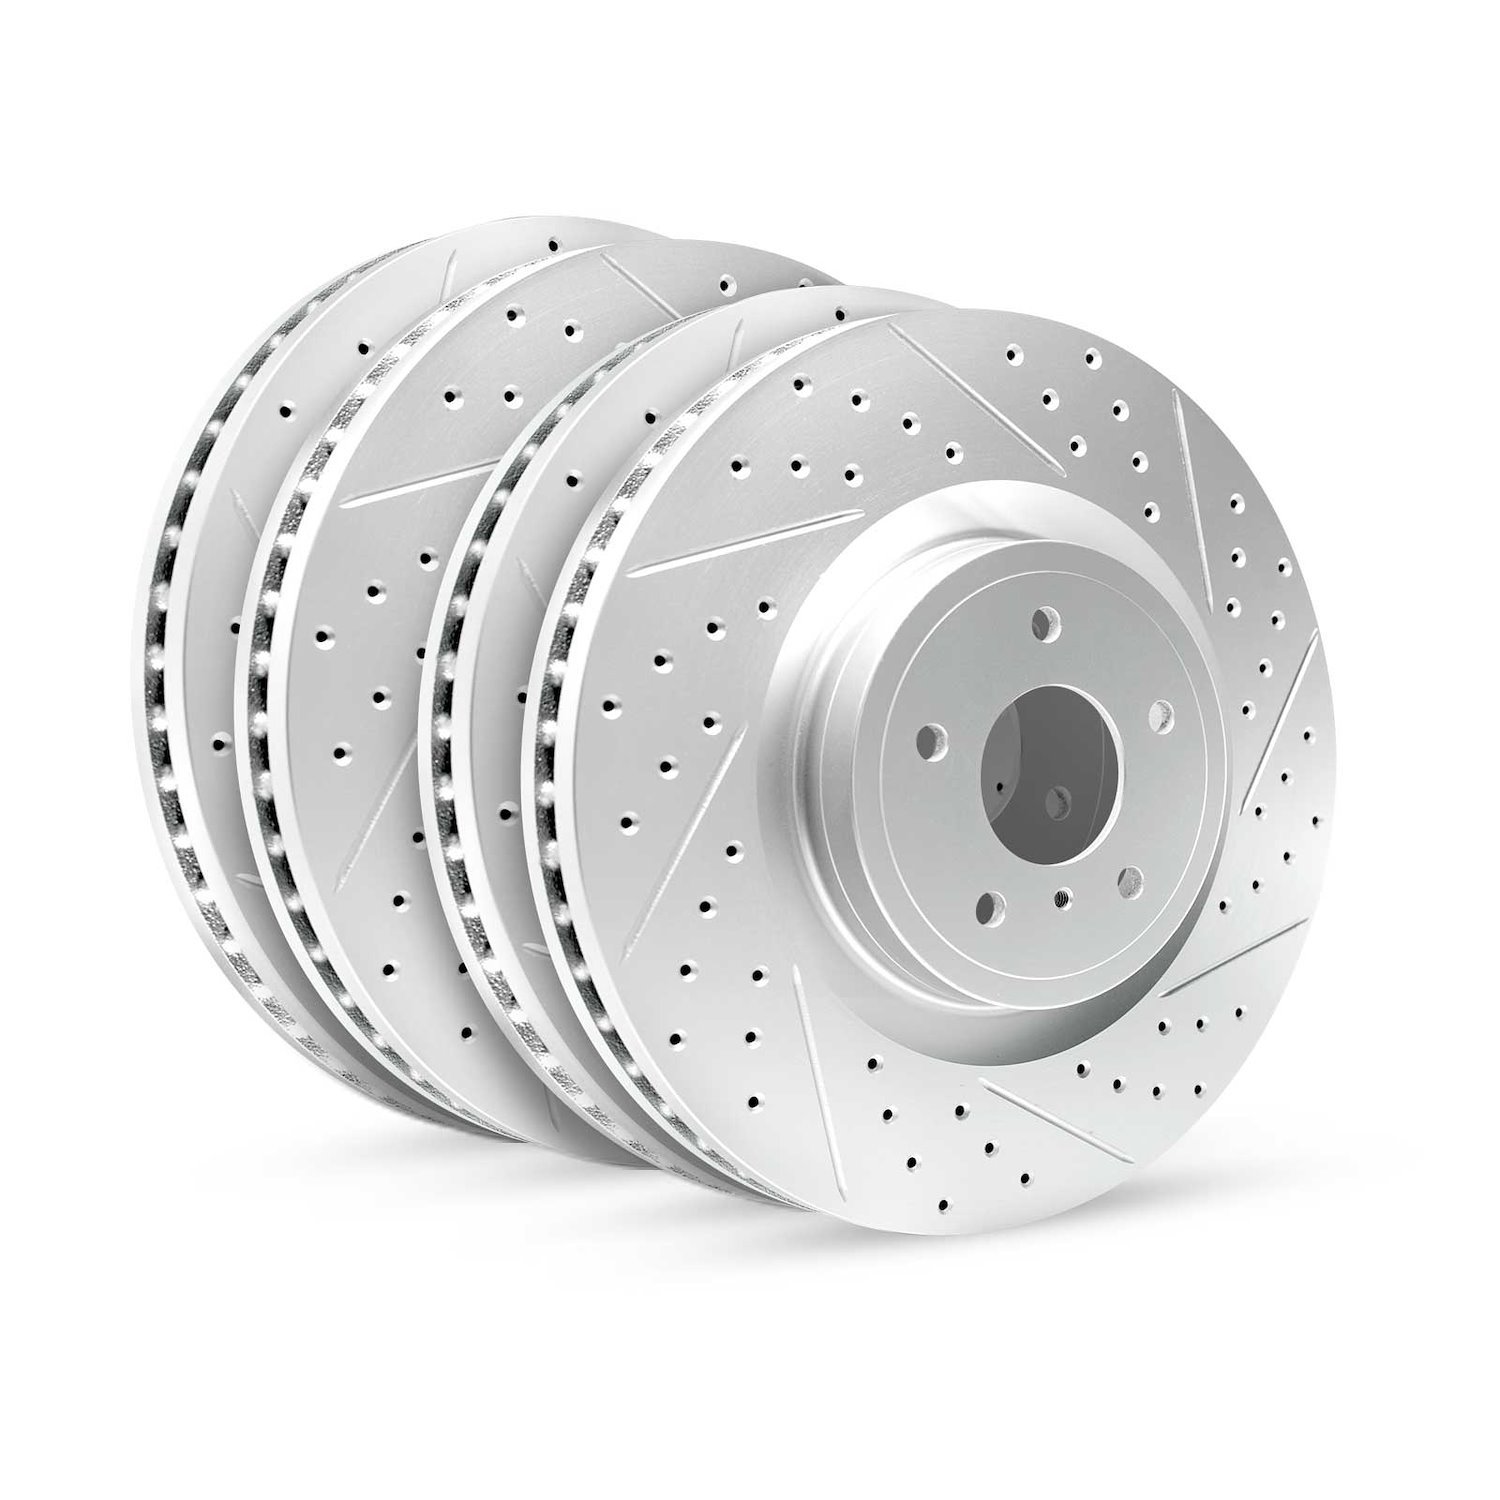 GEO-Carbon Drilled/Slotted Rotors, Fits Select Subaru, Position: